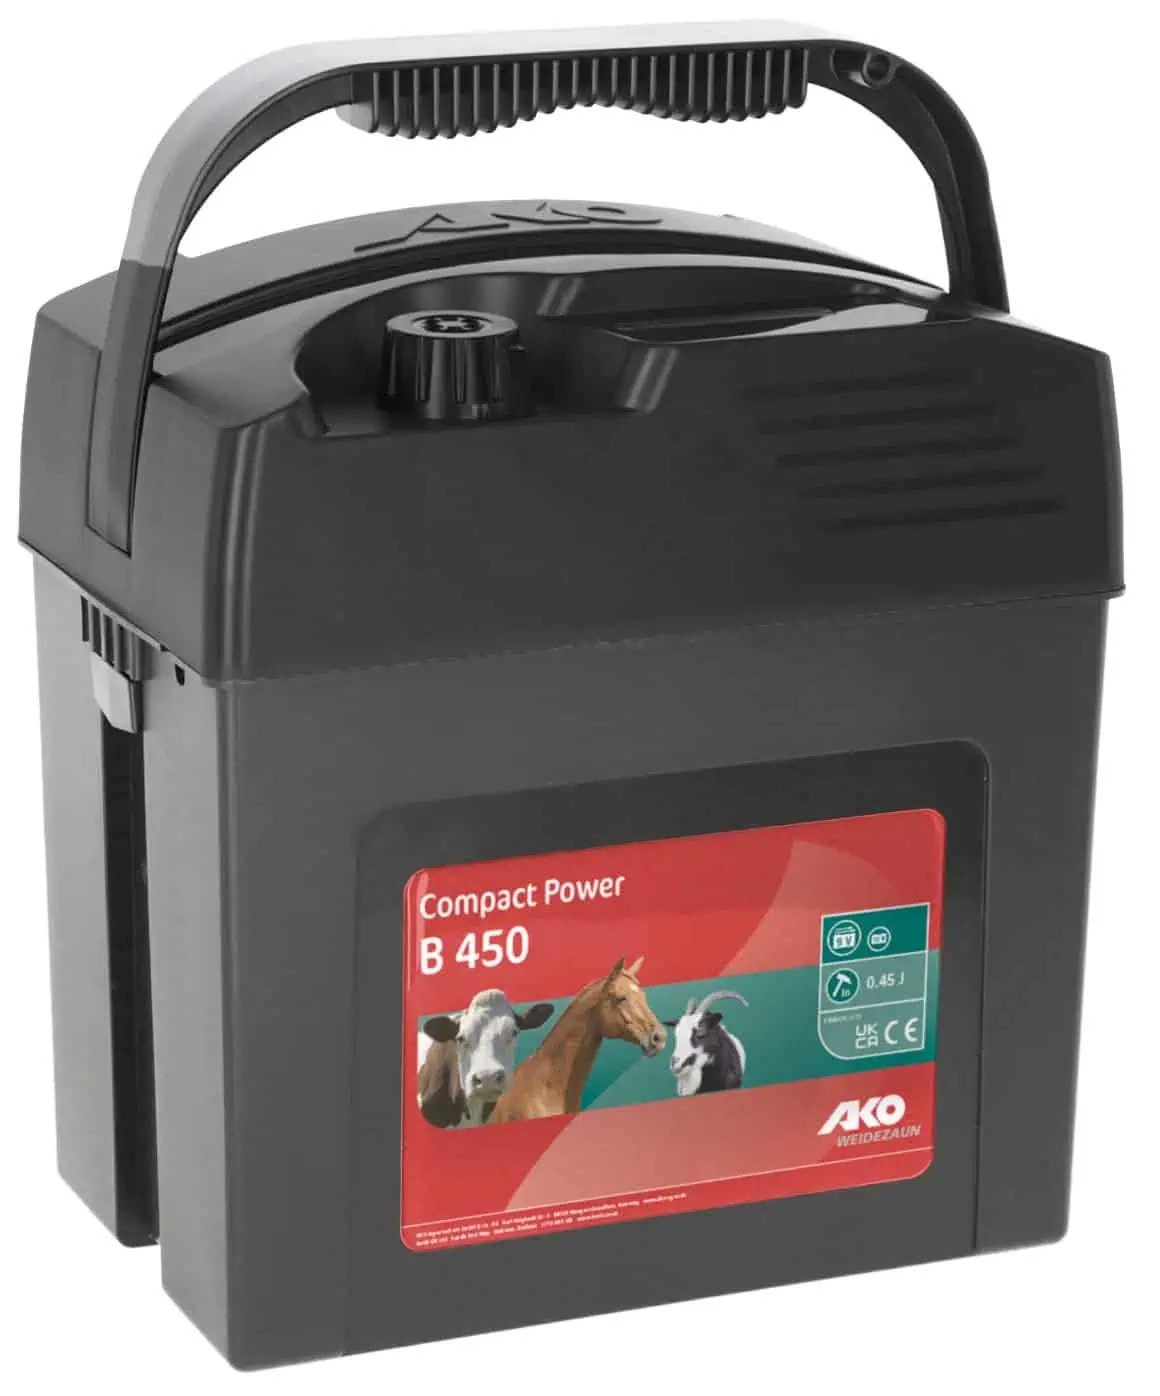 AKO Compact Power B450 9 Volt Fence Device